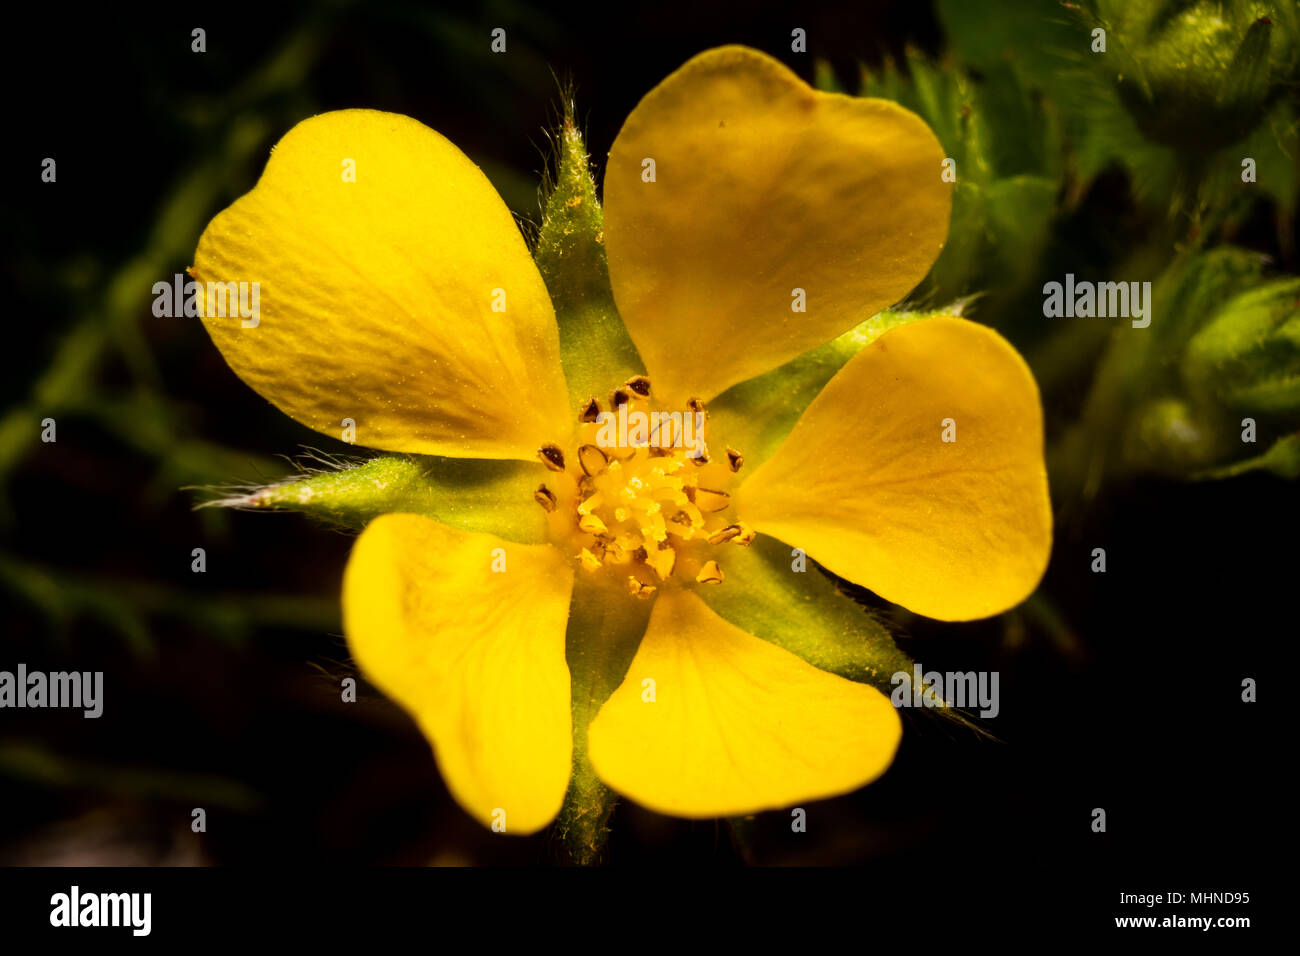 This spring wildflower bloom is seen up close in a macrophotography image. Stock Photo